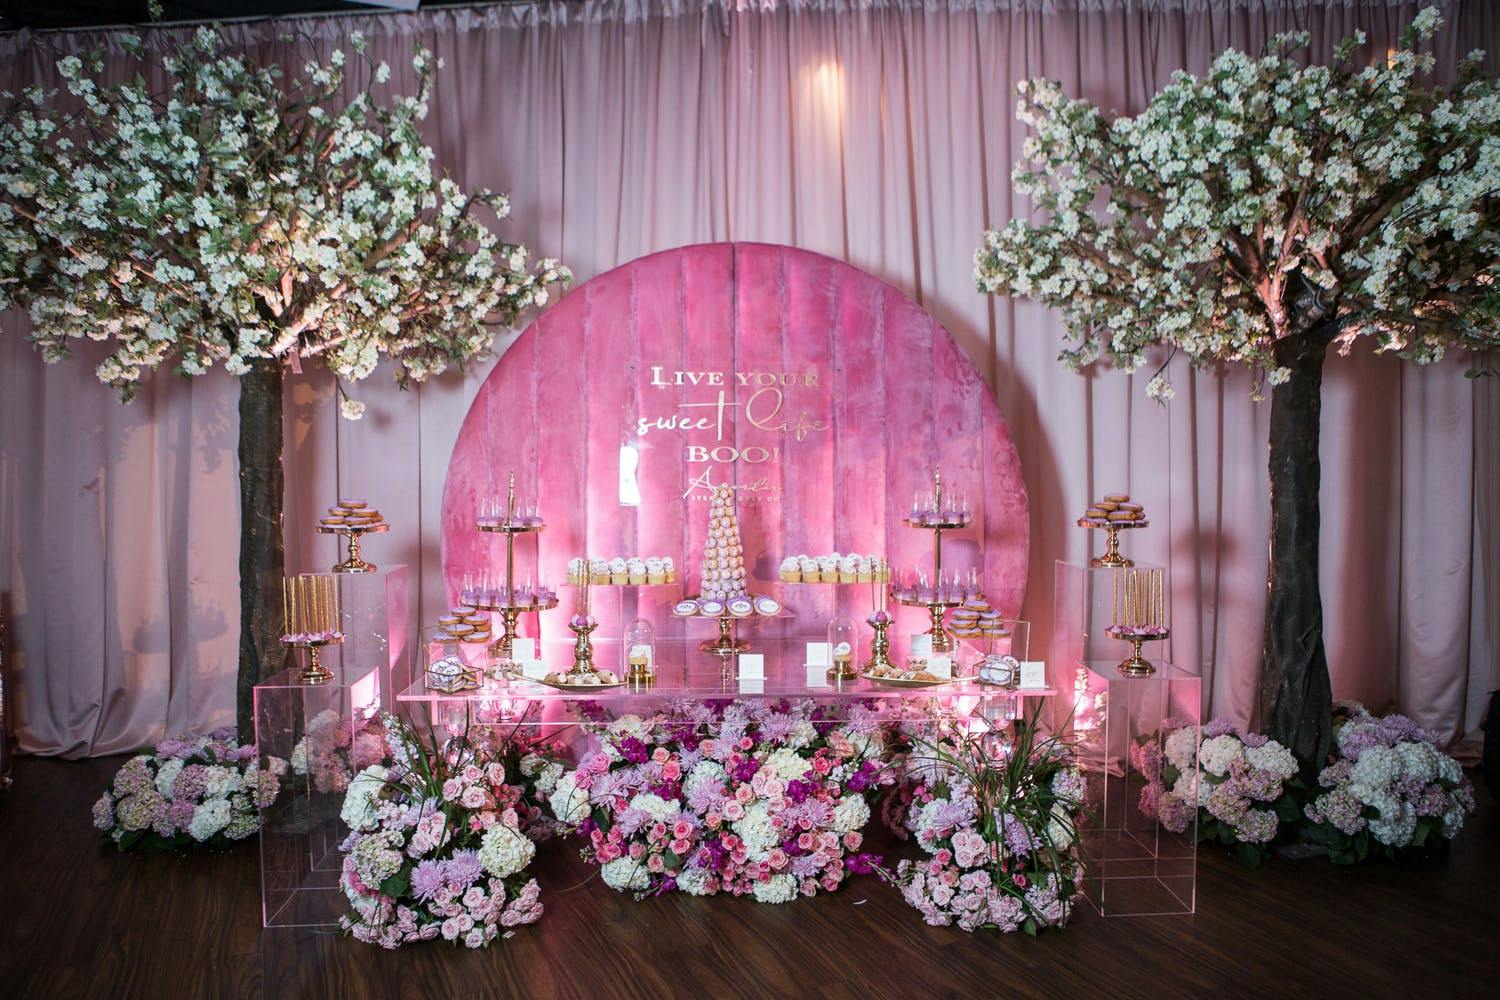 Enchanted garden launch with pink décor for Aventer Gray | PartySlate